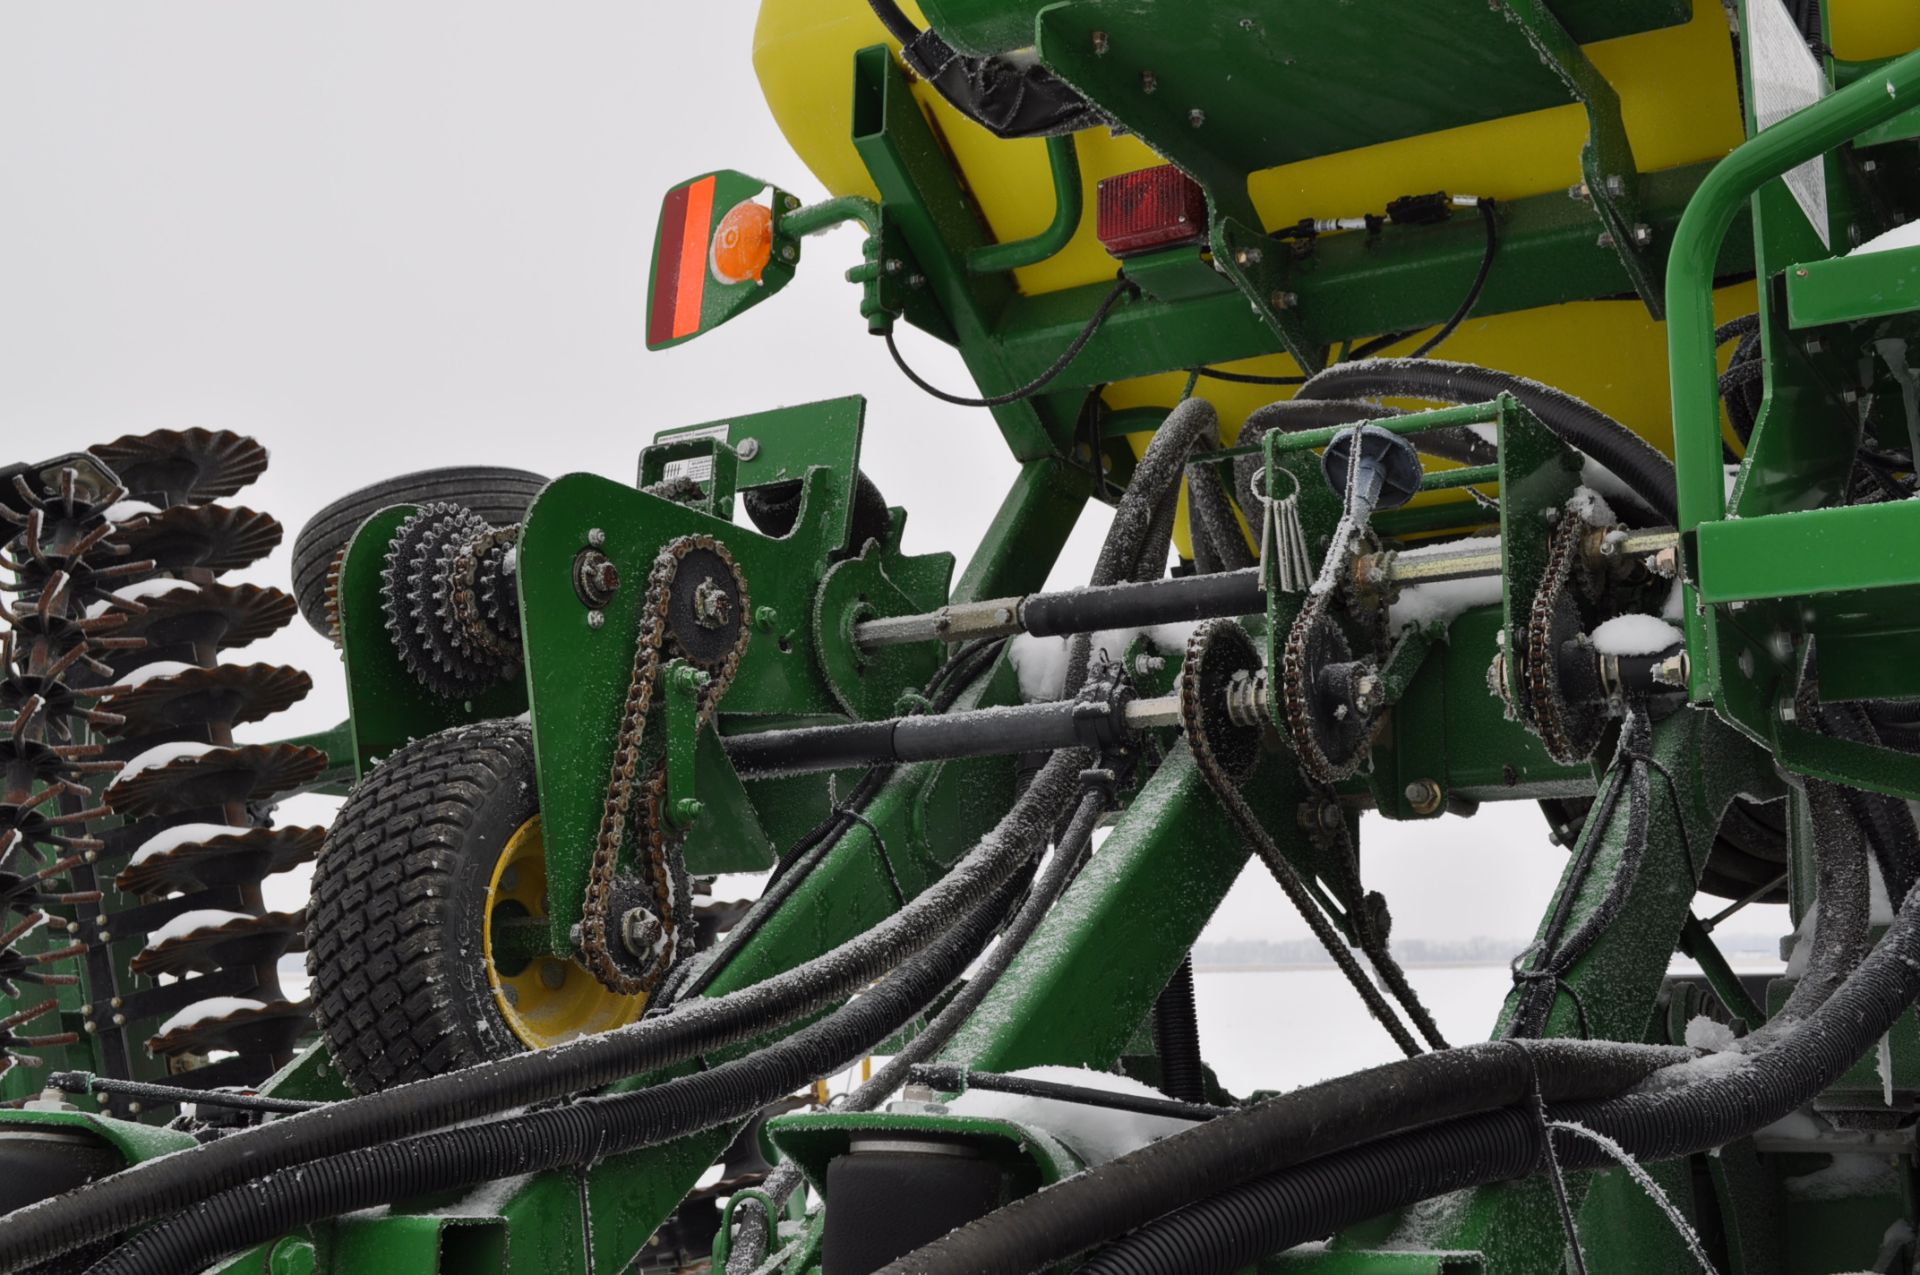 John Deere 1790 16/32 planter, CCS seed delivery, row cleaners, markers, seed firmers, SN 750247 - Image 6 of 14